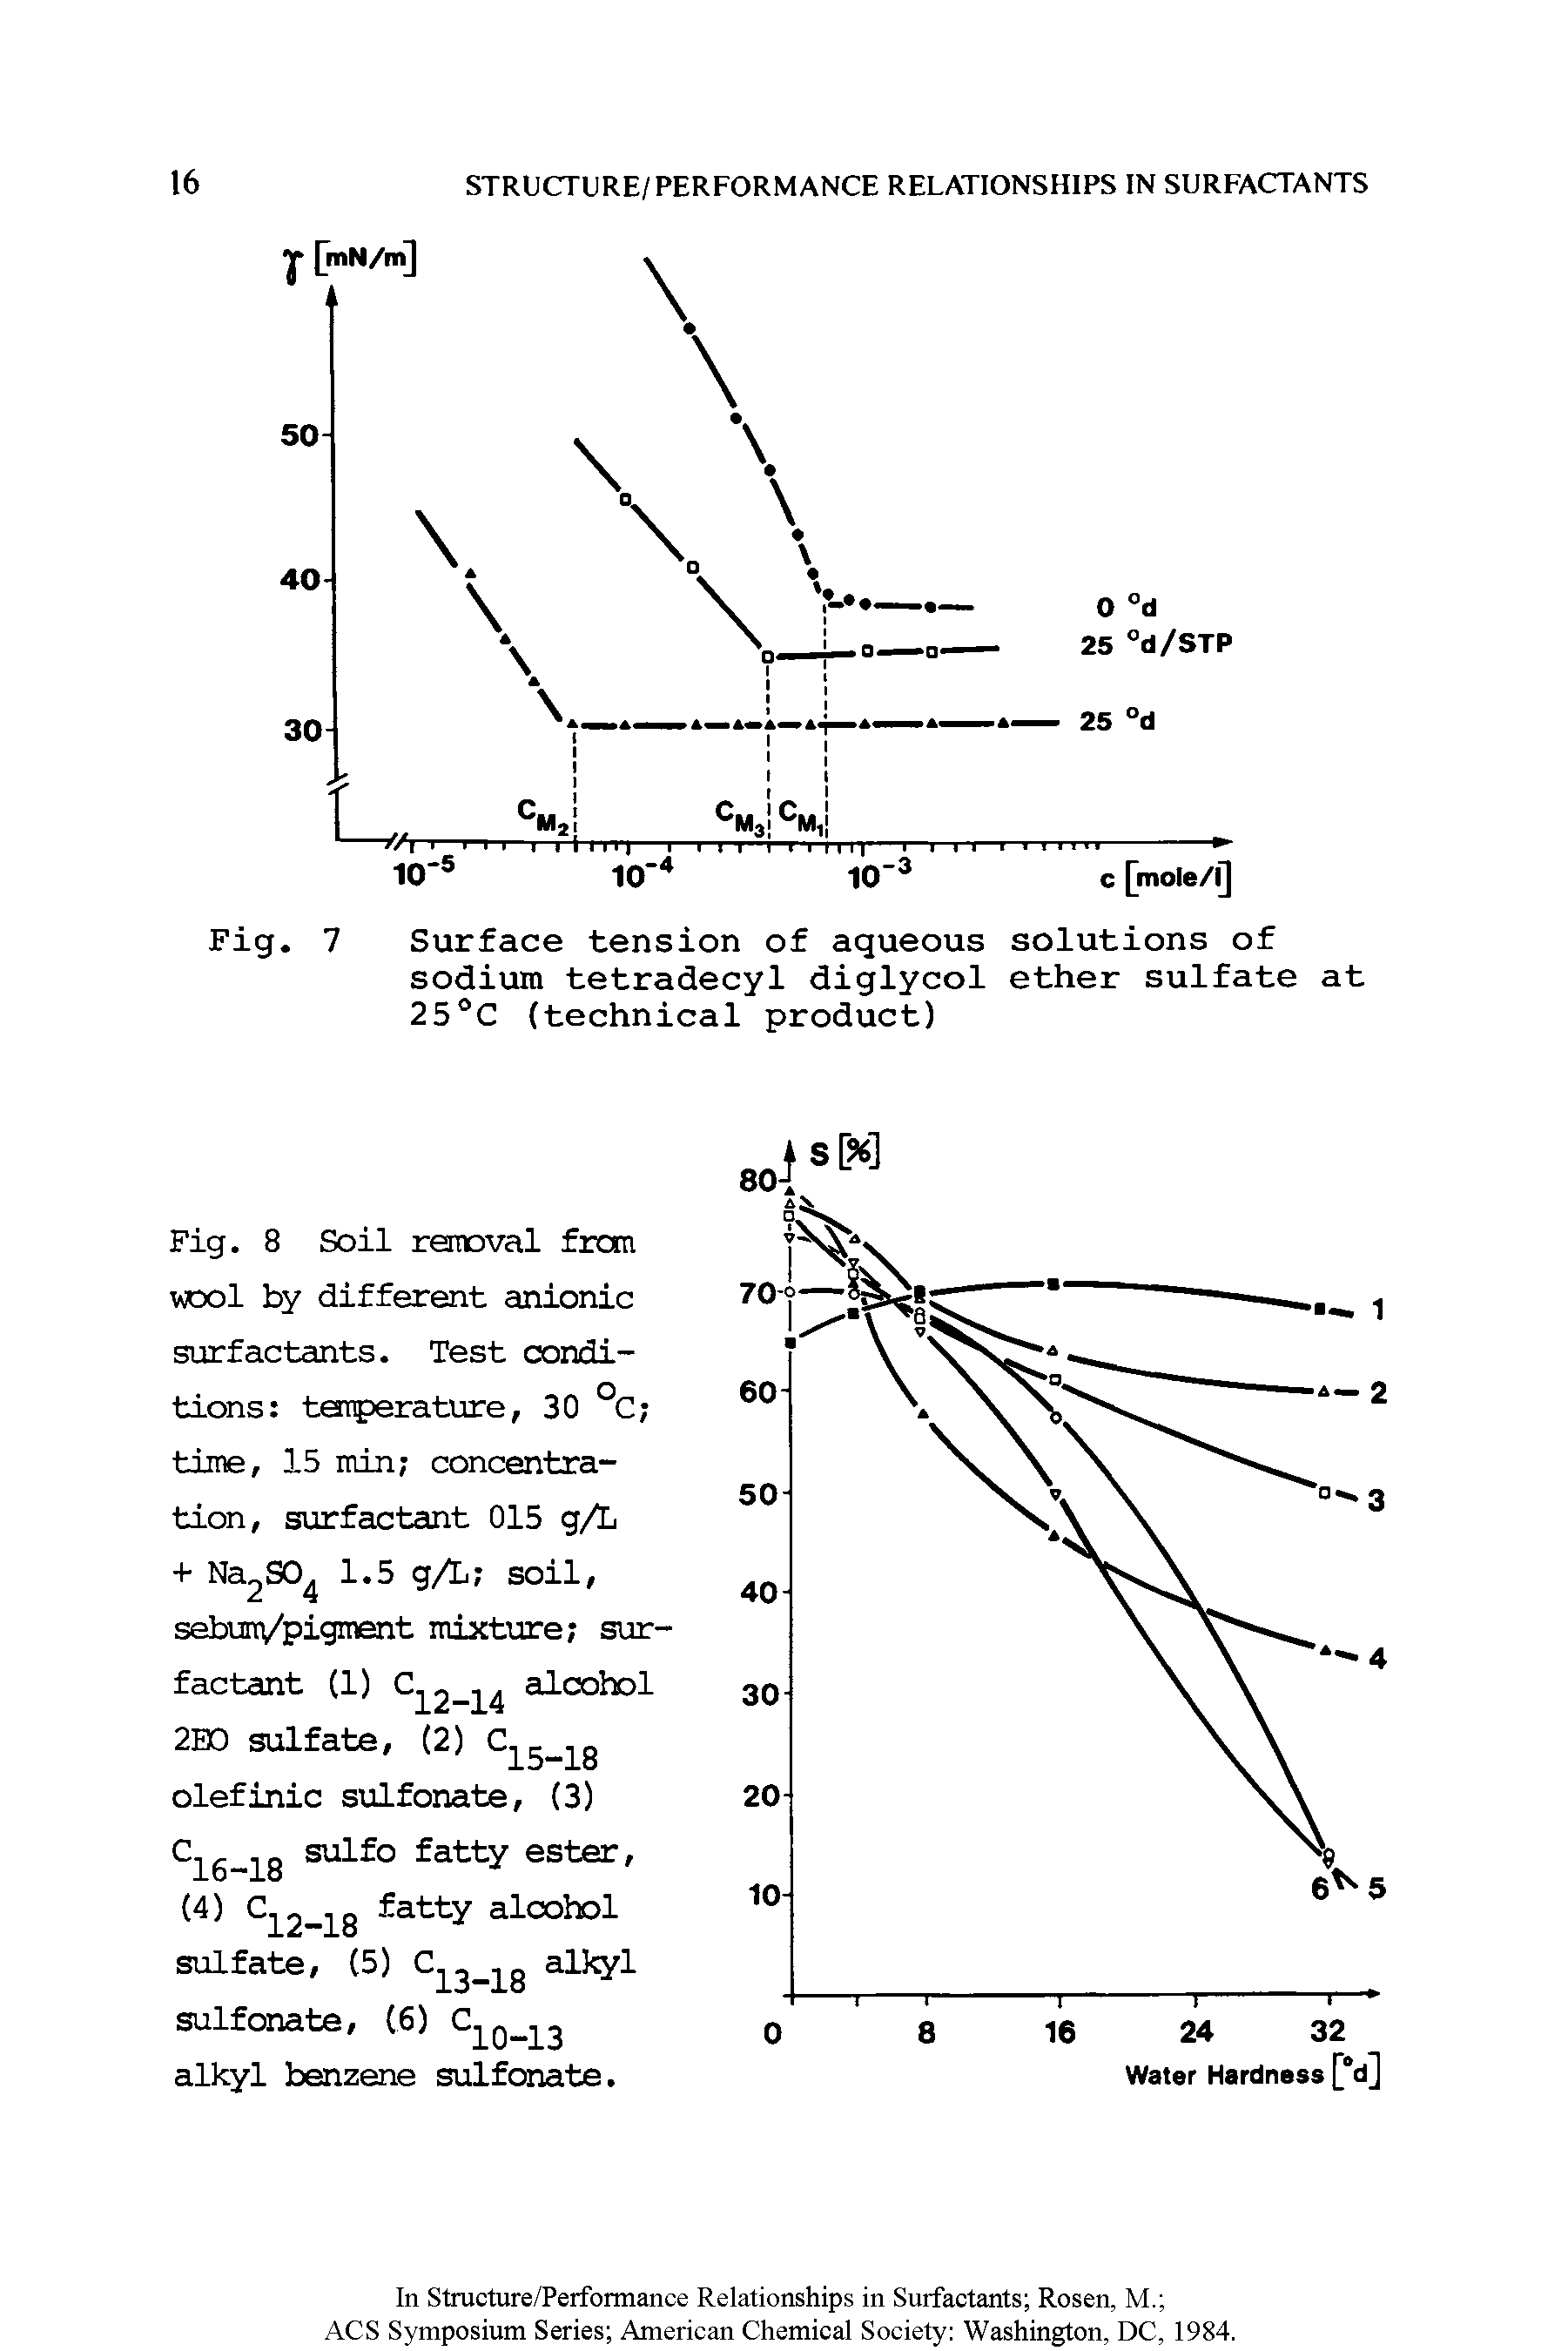 Fig. 8 Soil rennoval from wool by different anionic surfactants. Test conditions tarperature, 30 °C time, 15 min concentration, surfactant 015 g/L + Na2S0 1.5 g/L soil, sebuiVpigment mixture surfactant (1) C 2 2 4 alcohol 2B0 sulfate, (2) C 5 ] g olefinic sulfonate, (3) "16-18 fatty ester,...